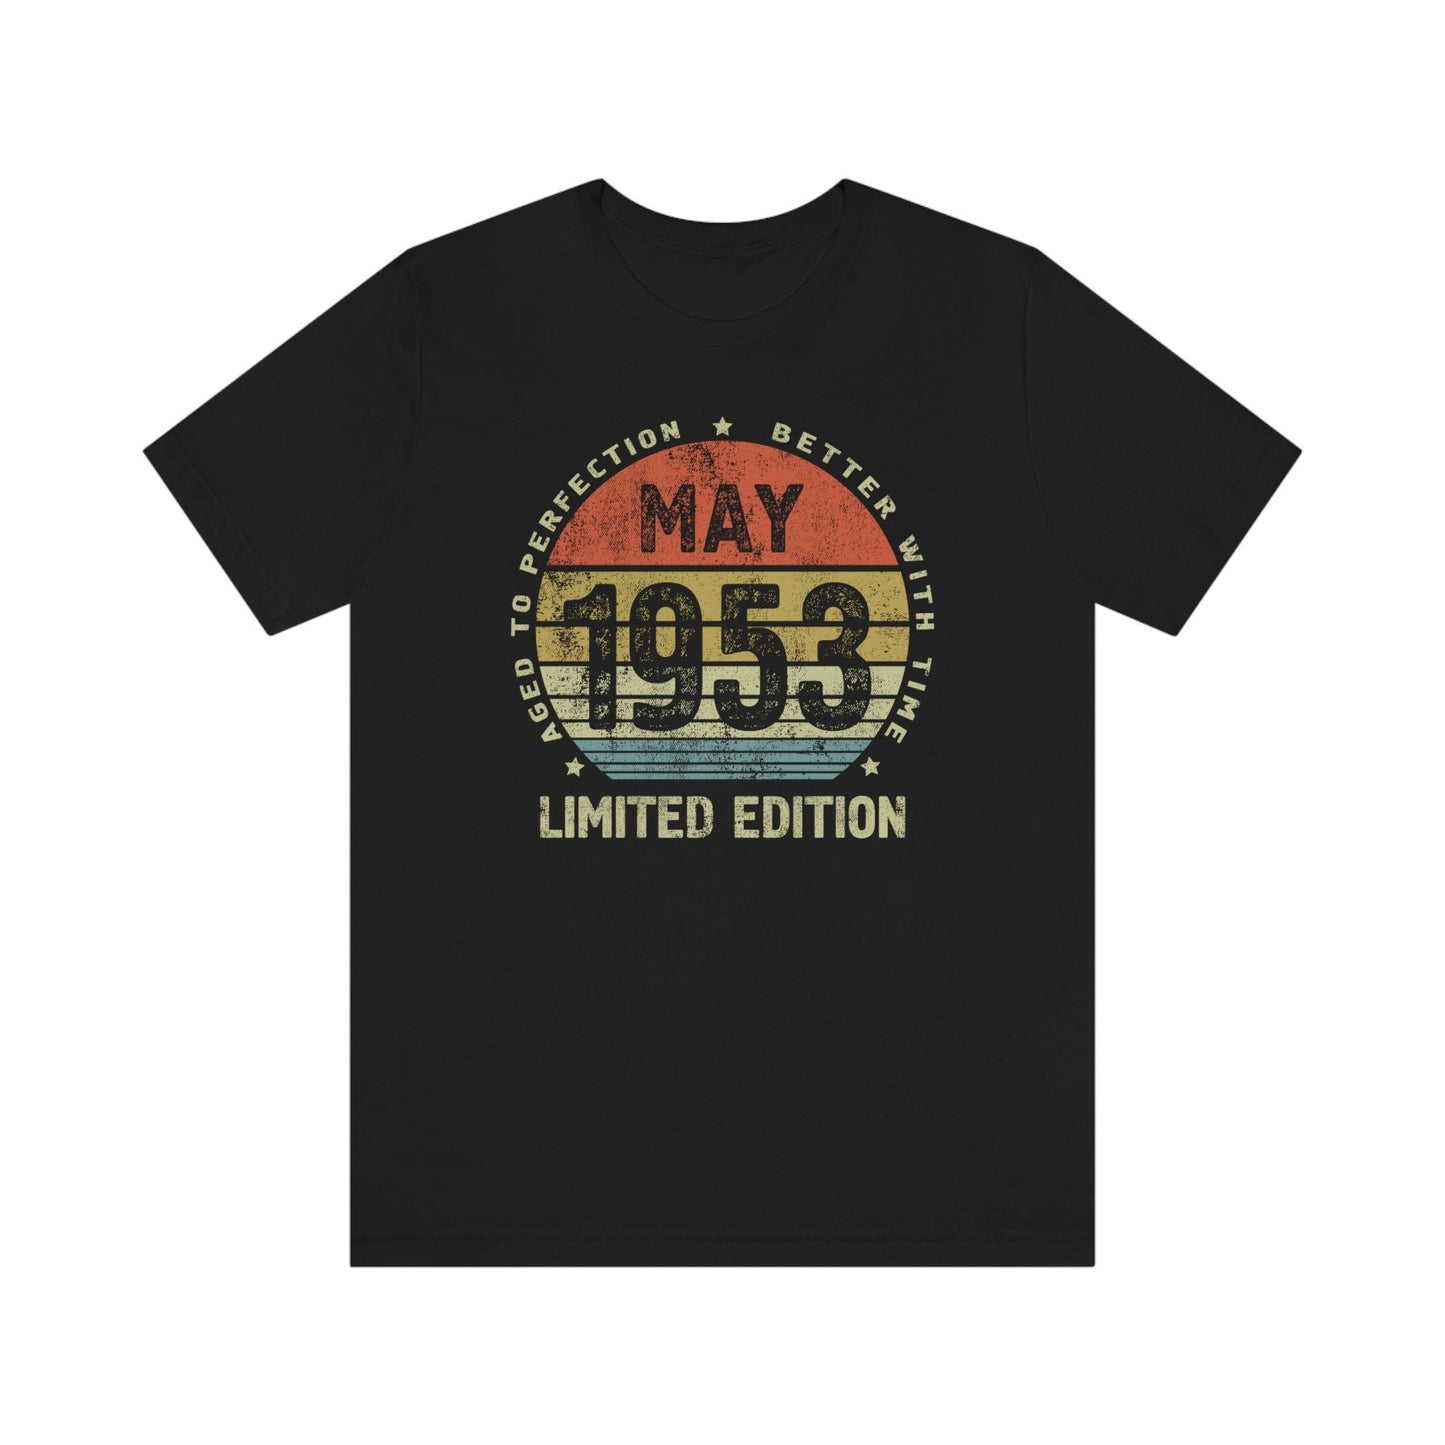 May 1953  birthday shirt for women or men, Gift shirt for wife or husband